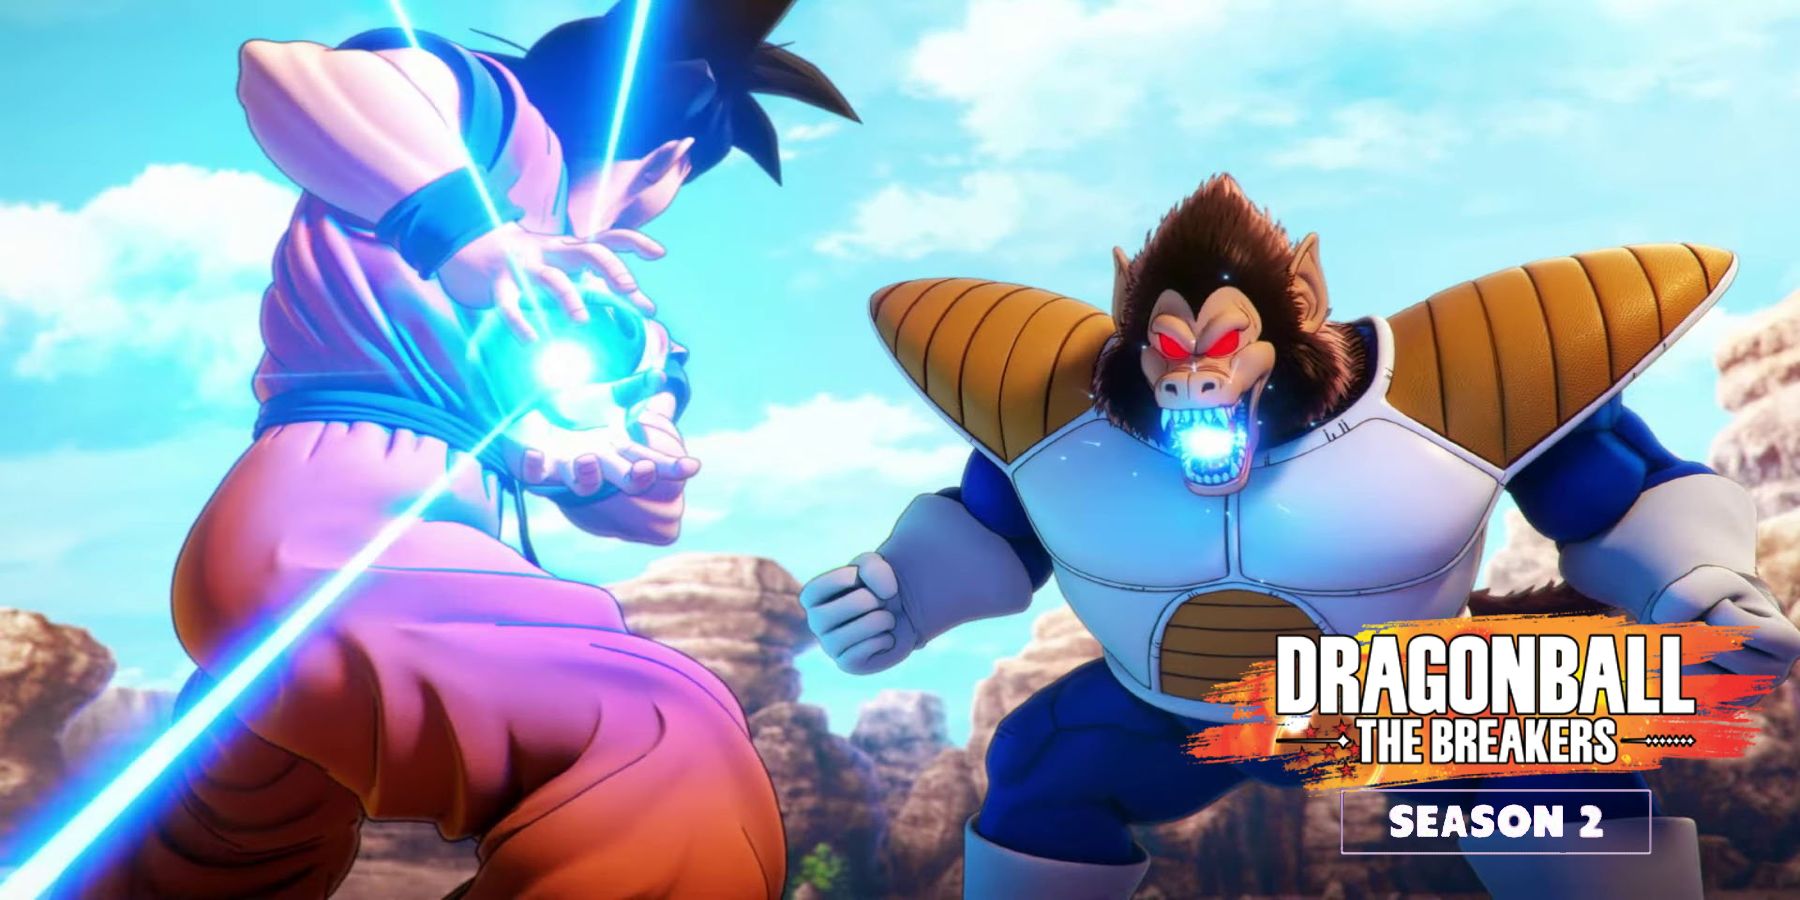 Dragon Ball: The Breakers is basically Dead By Daylight, but with